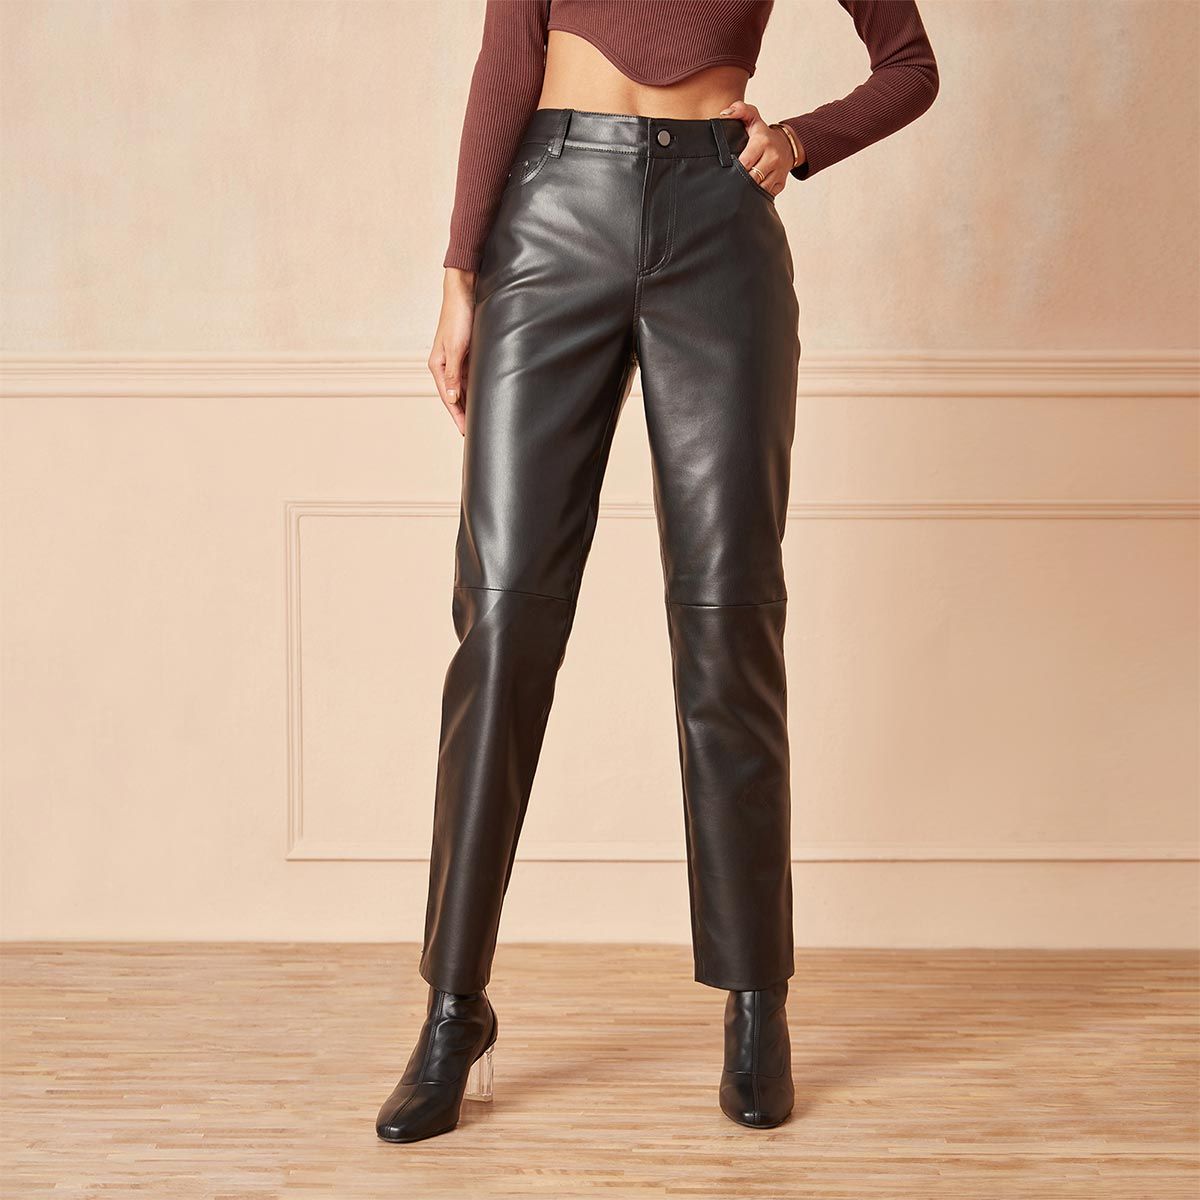 Warm faux leather pants with pockets | GATE